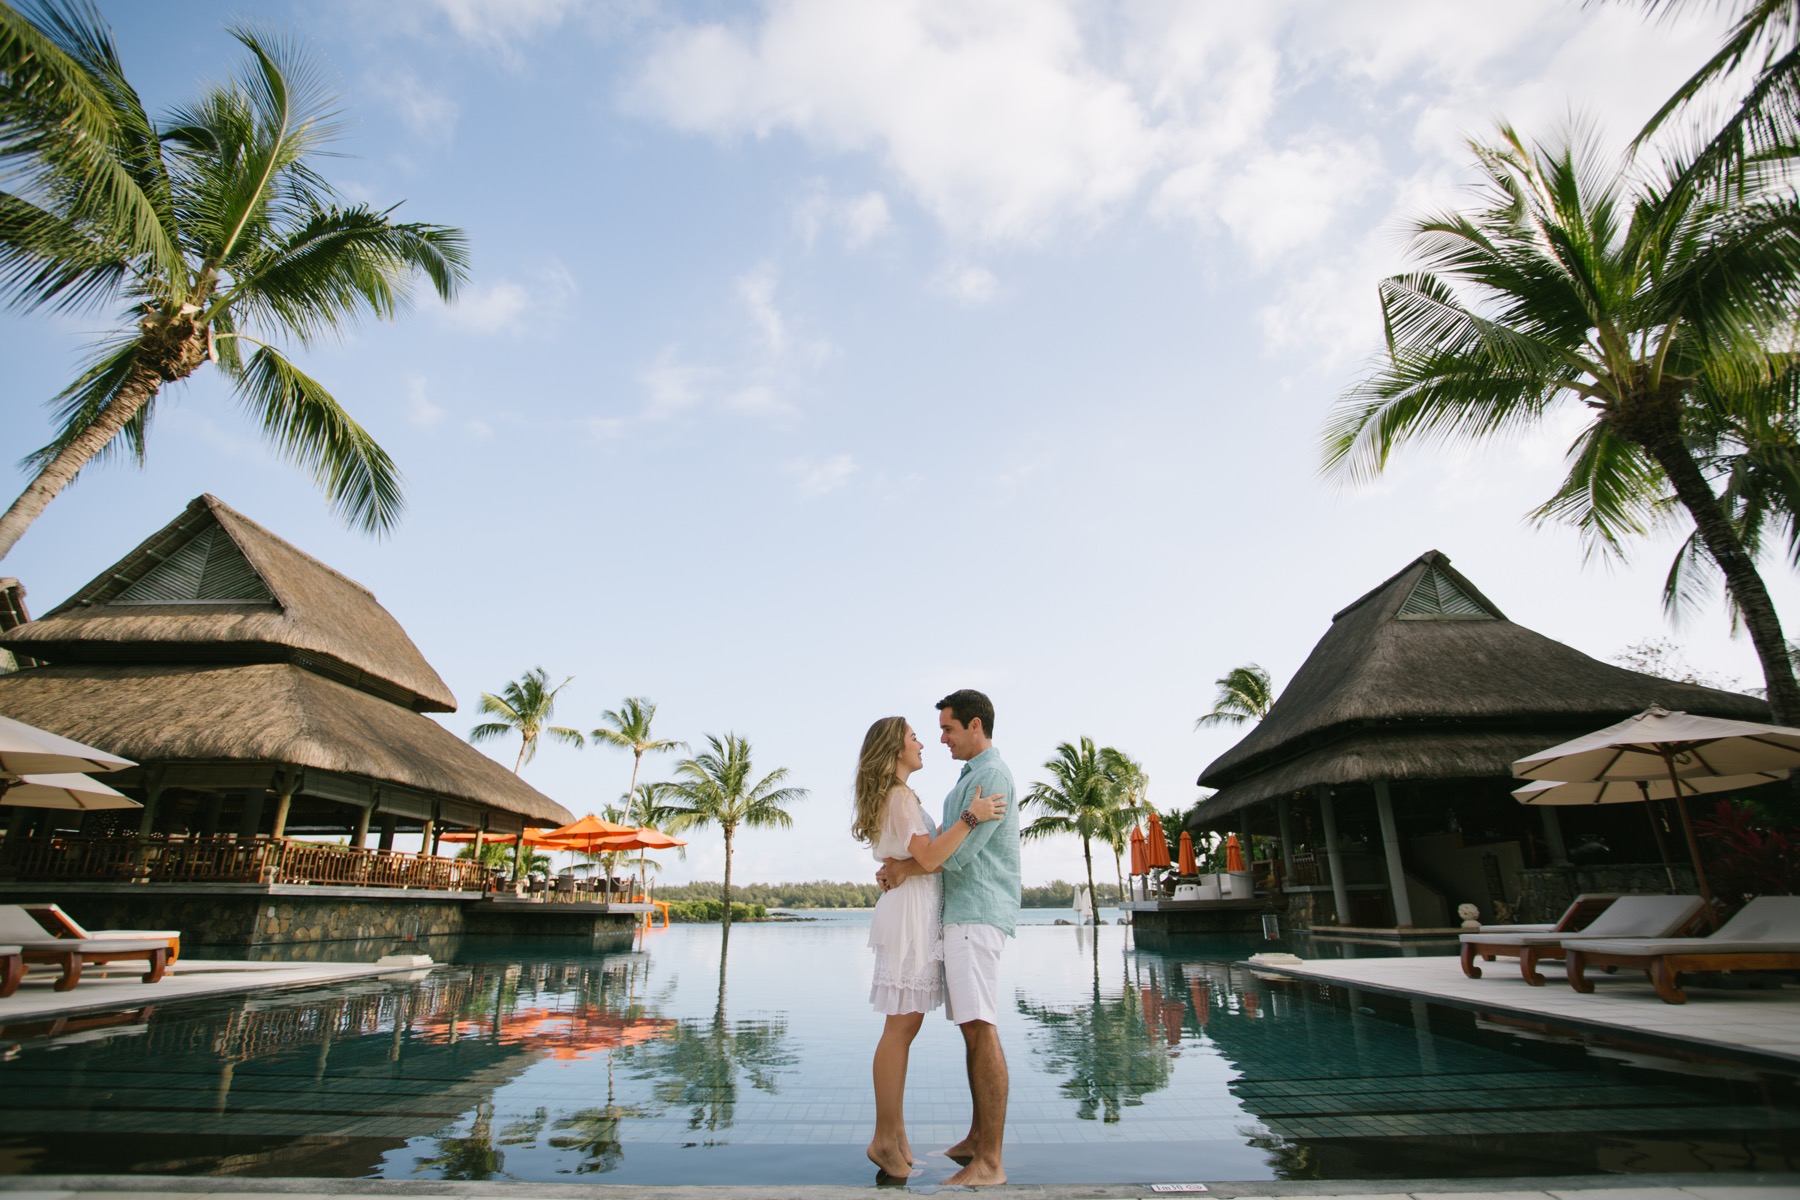 Top 10 International Holiday places for Honeymoon